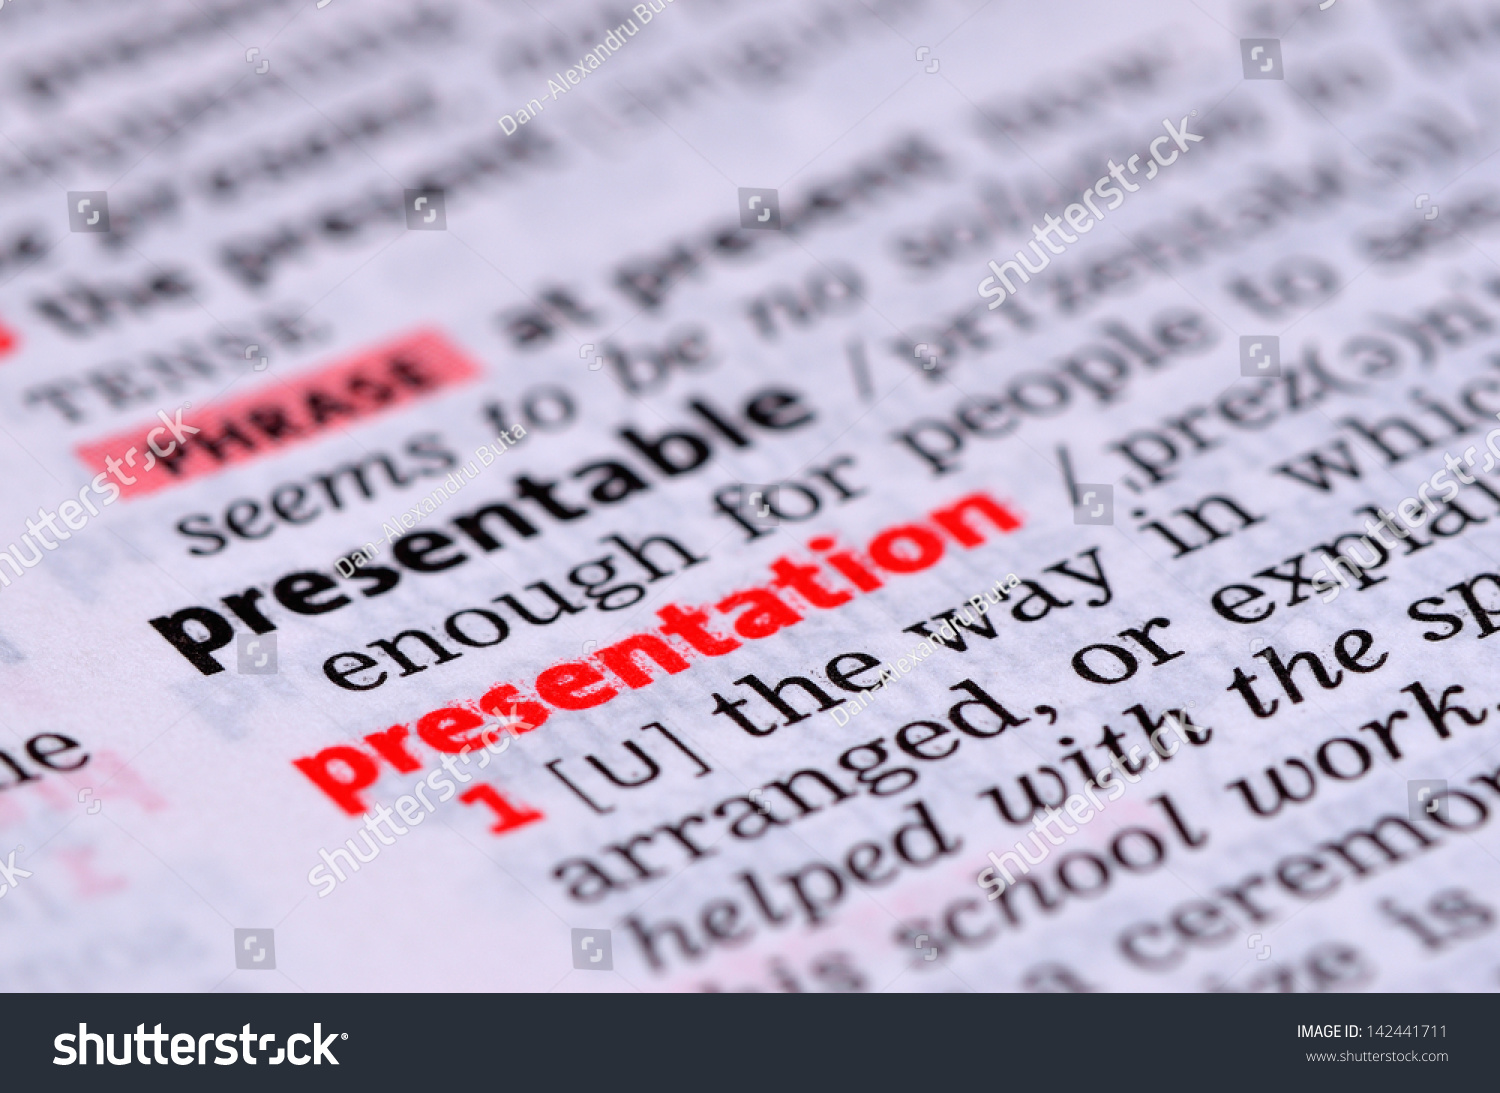 what is meant by the word presentation